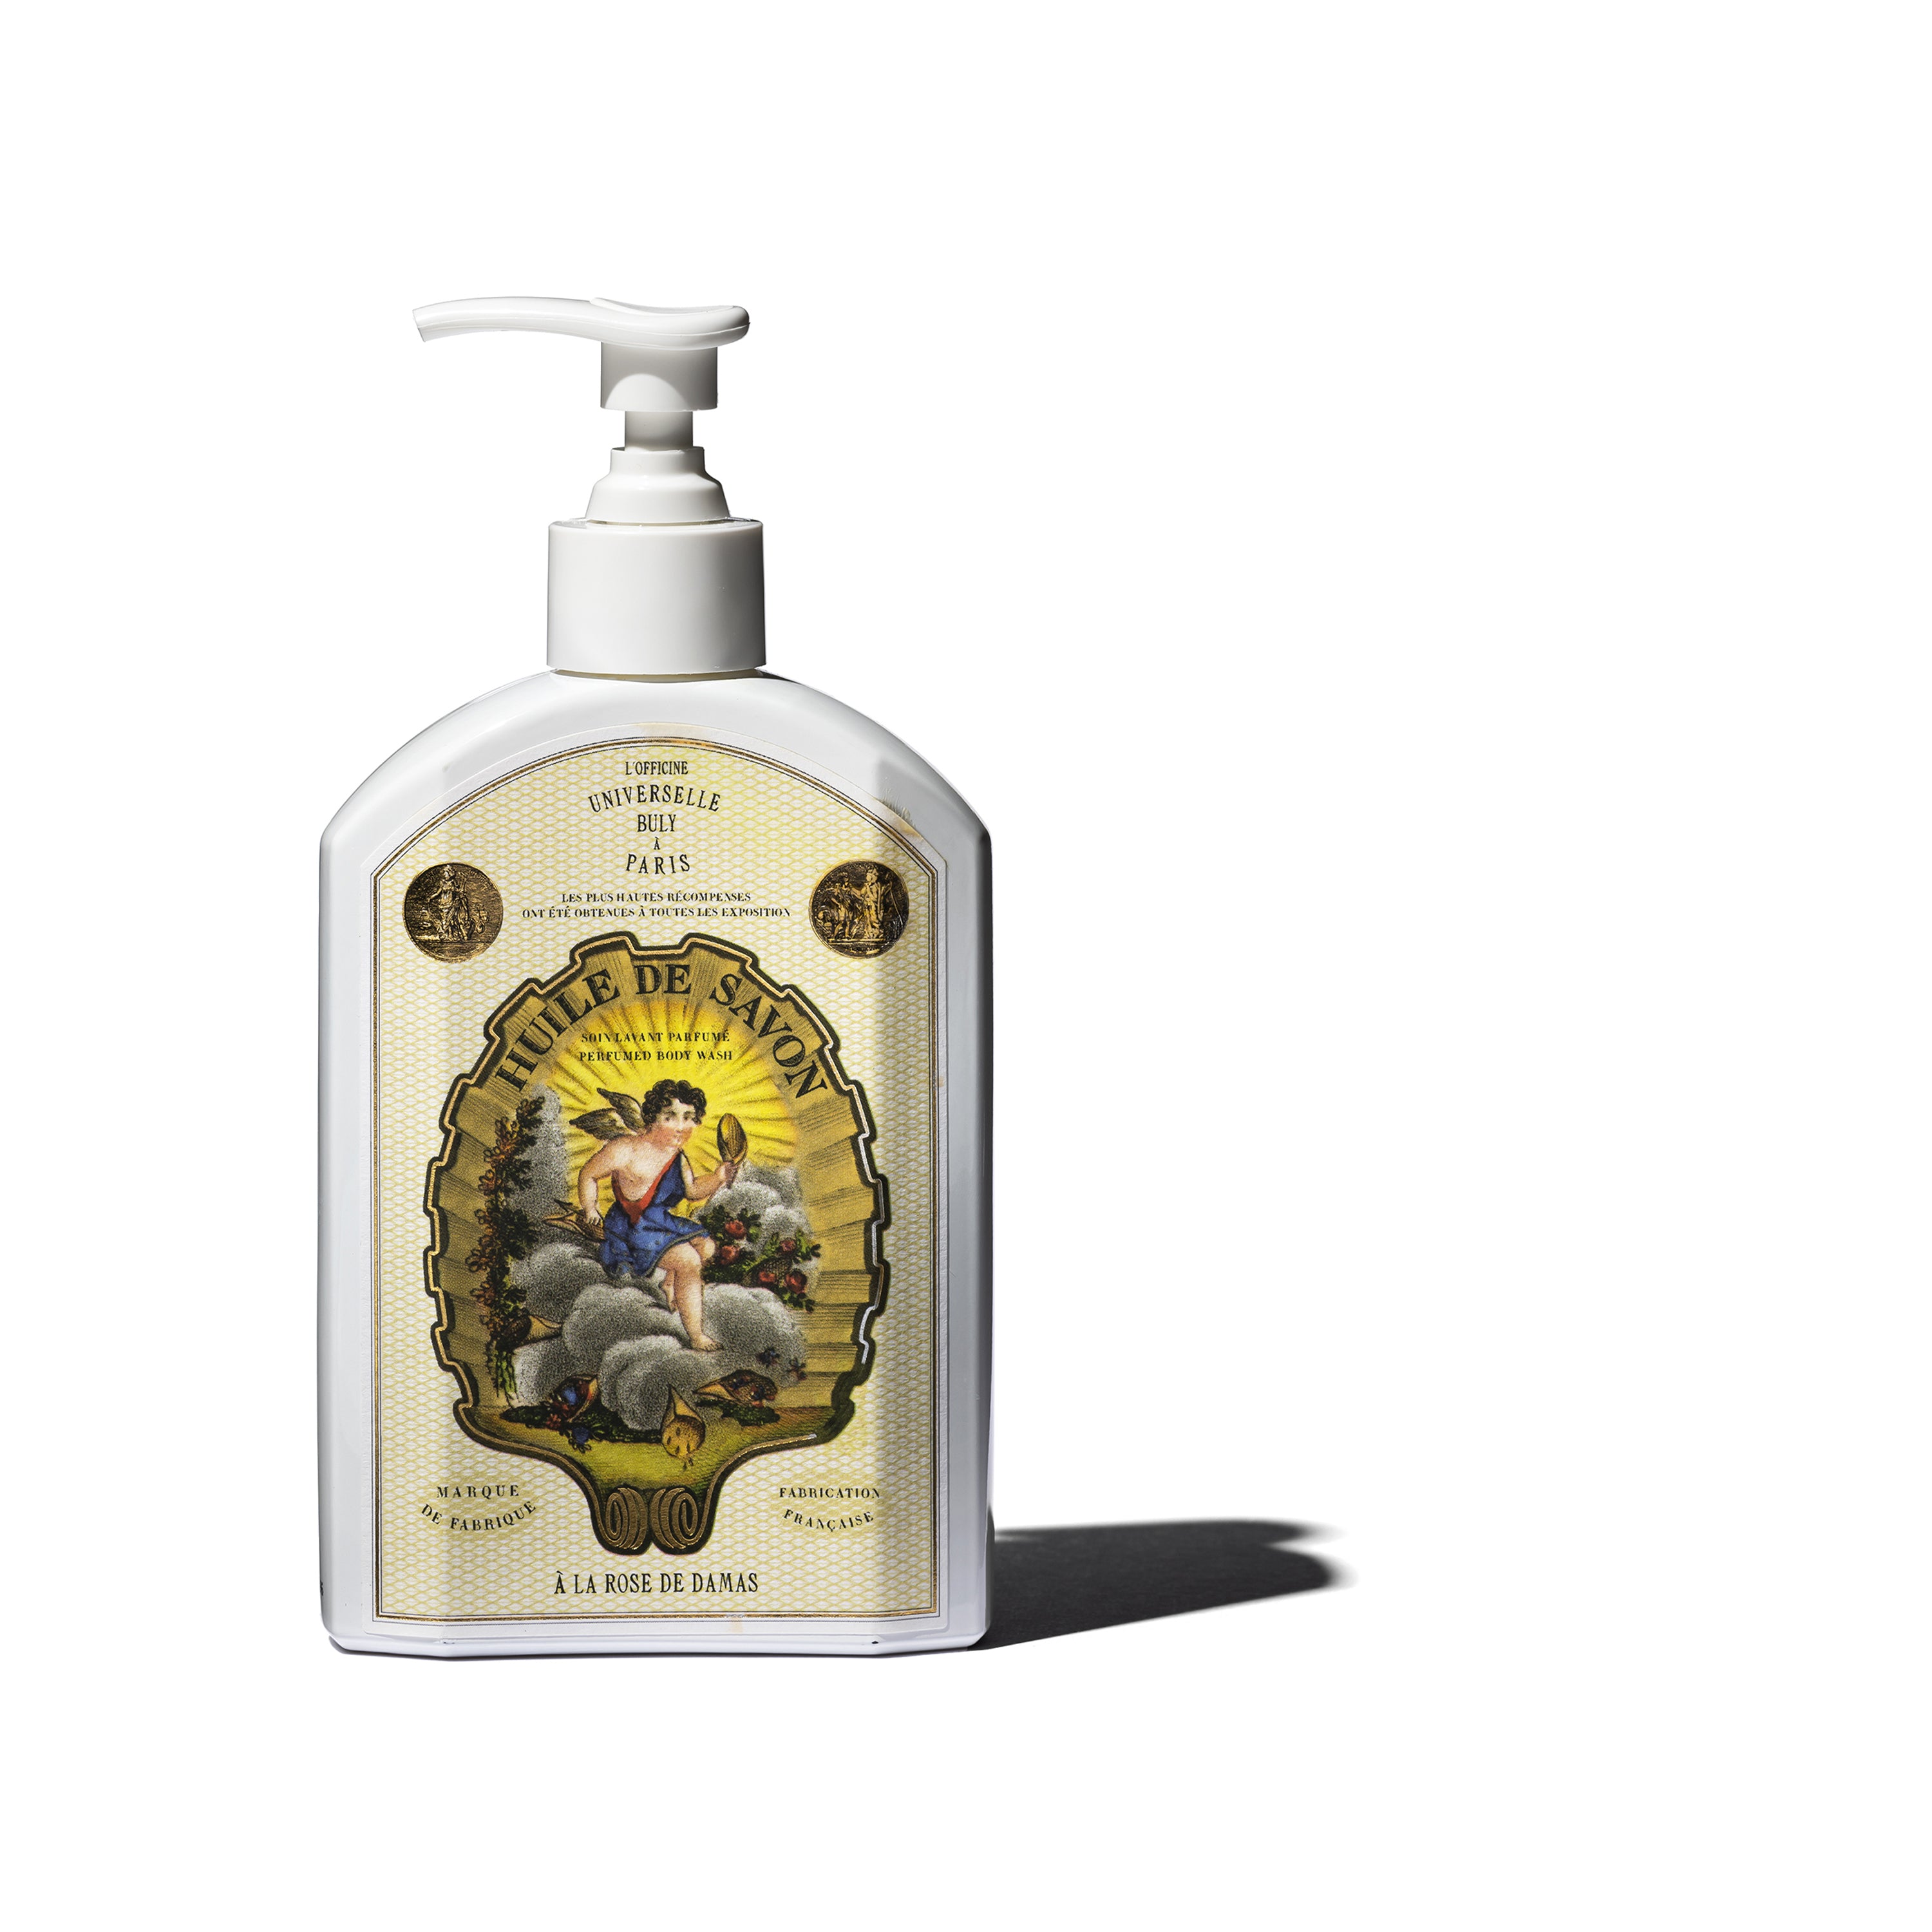 Officine Universelle Buly Damask Rose Dry Body Oil